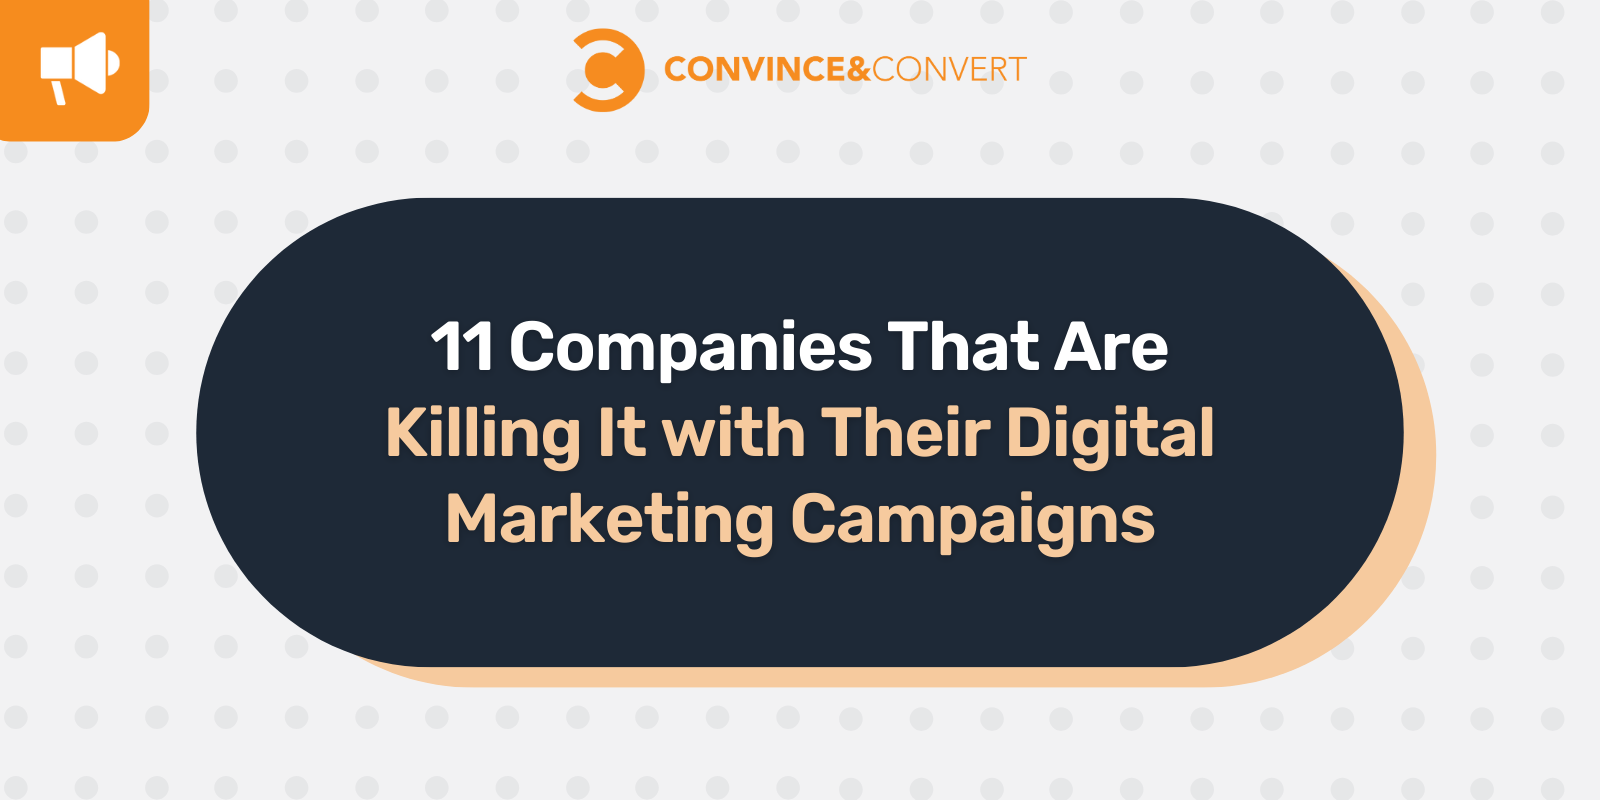 11 Companies That Are Killing It with Their Digital Marketing Campaigns